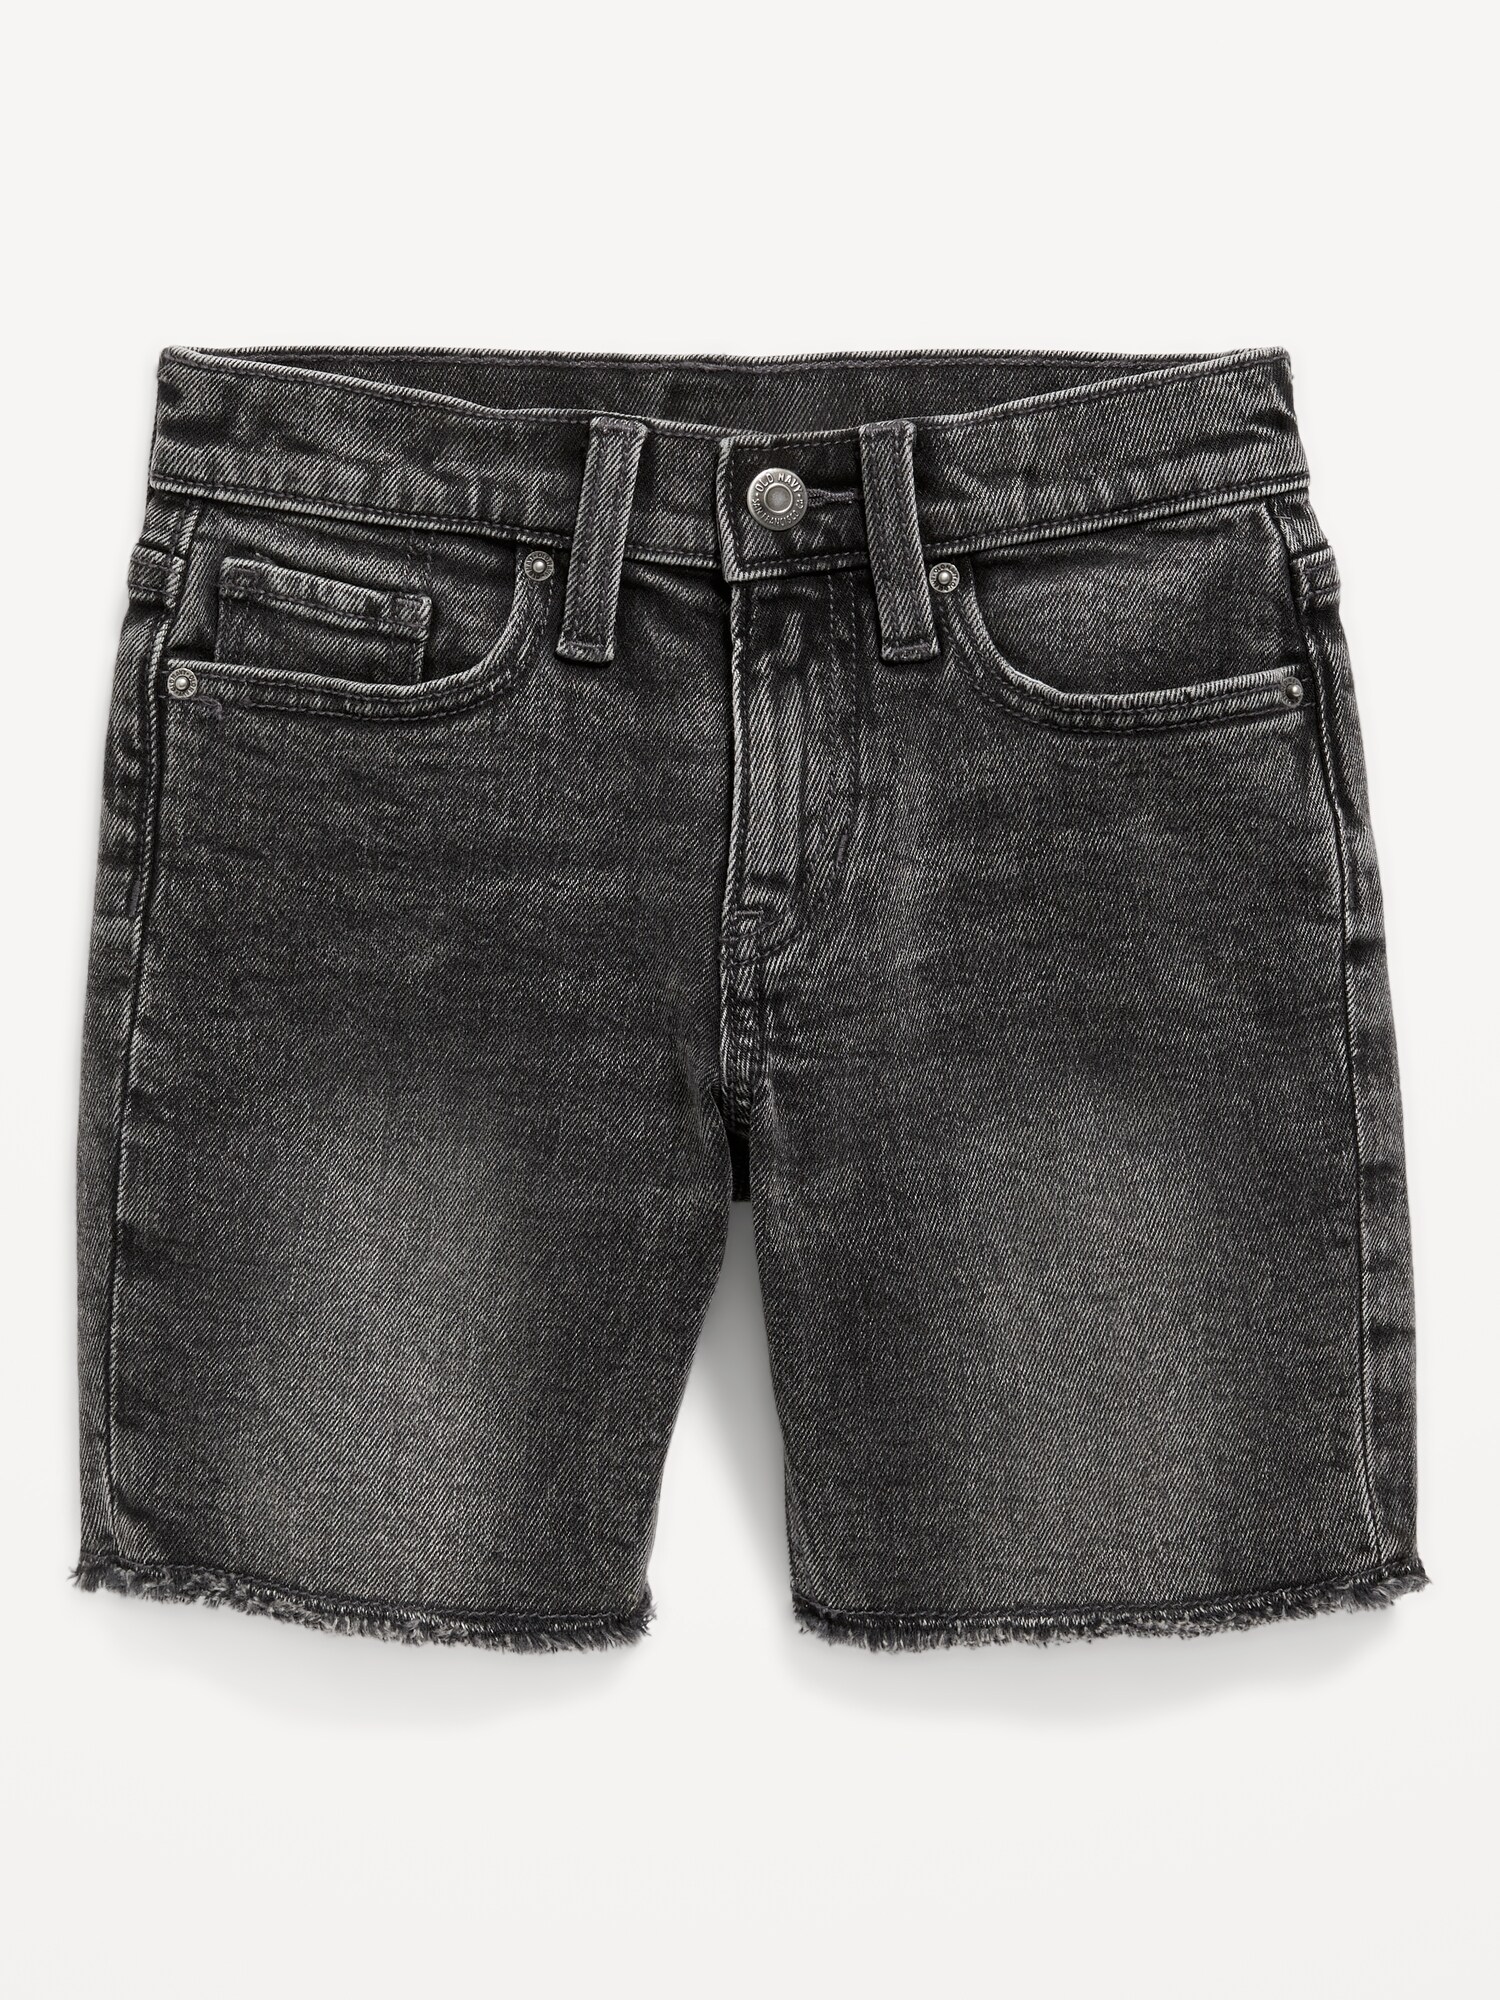 High-Waisted Cut-Off Jean Bermuda Shorts for Girls | Old Navy